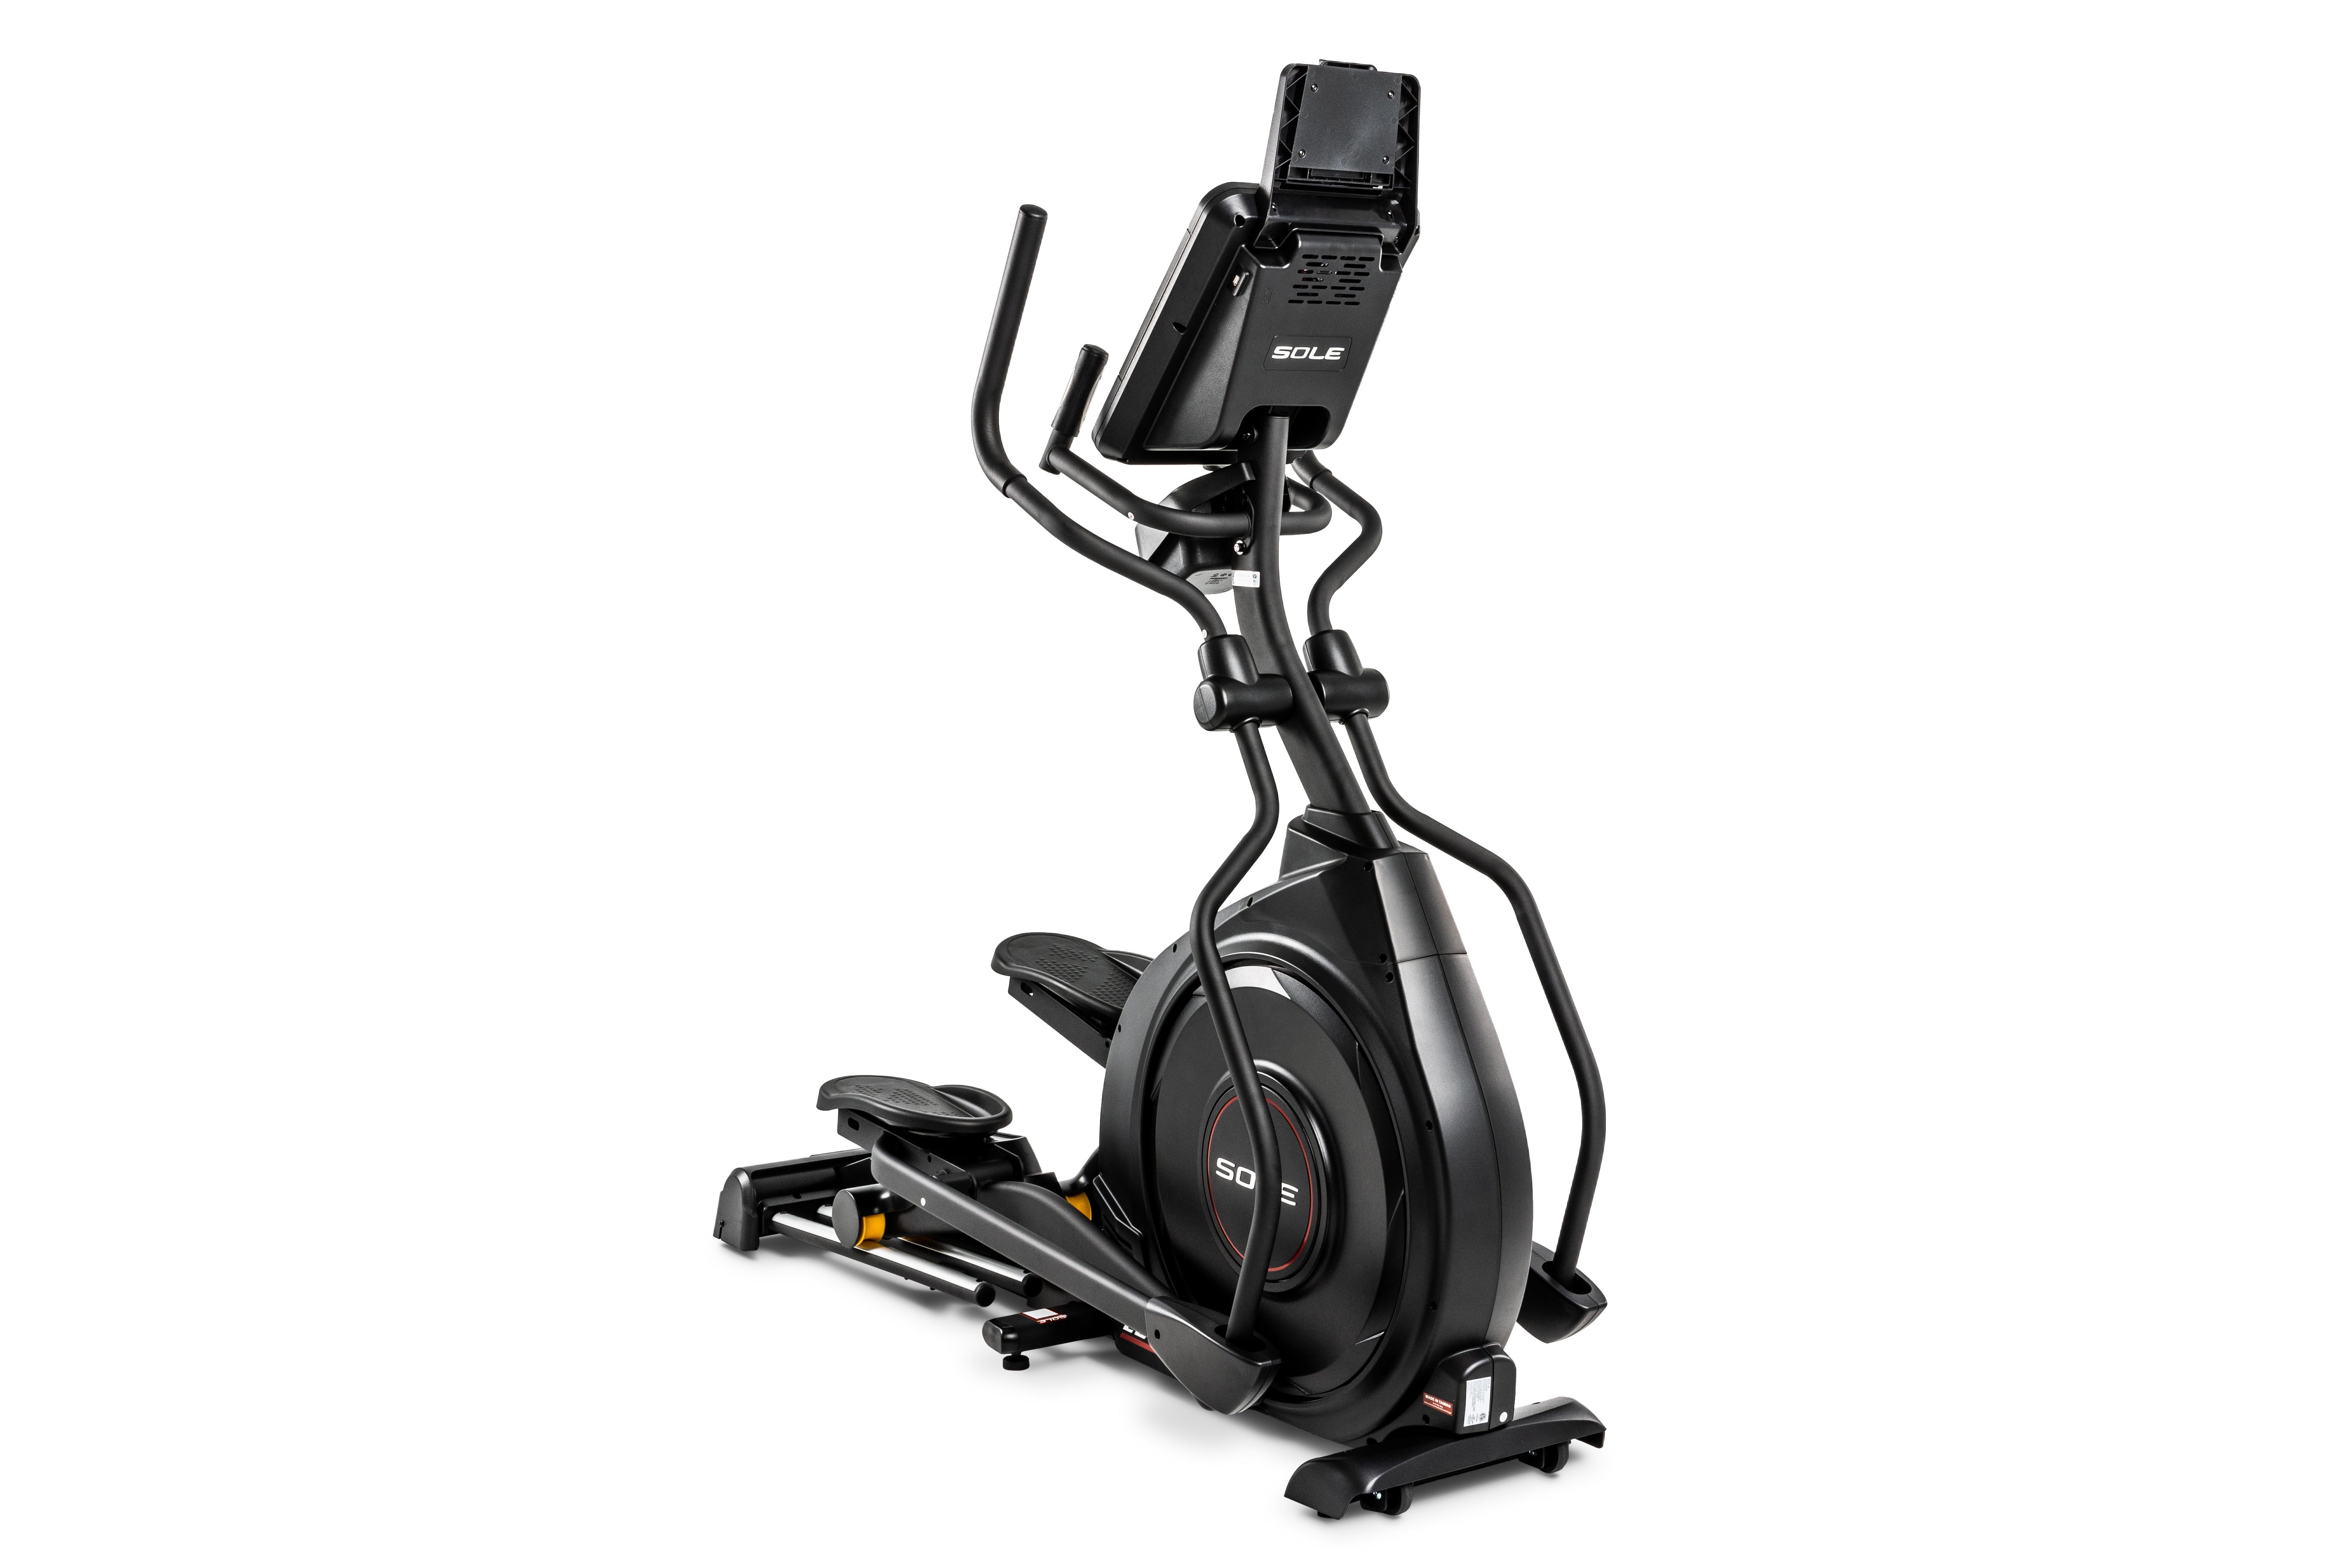 Sole E25 elliptical machine in a three-quarter view, highlighting its digital display, dual handles, foot pedals, and sturdy base, set against a white background.